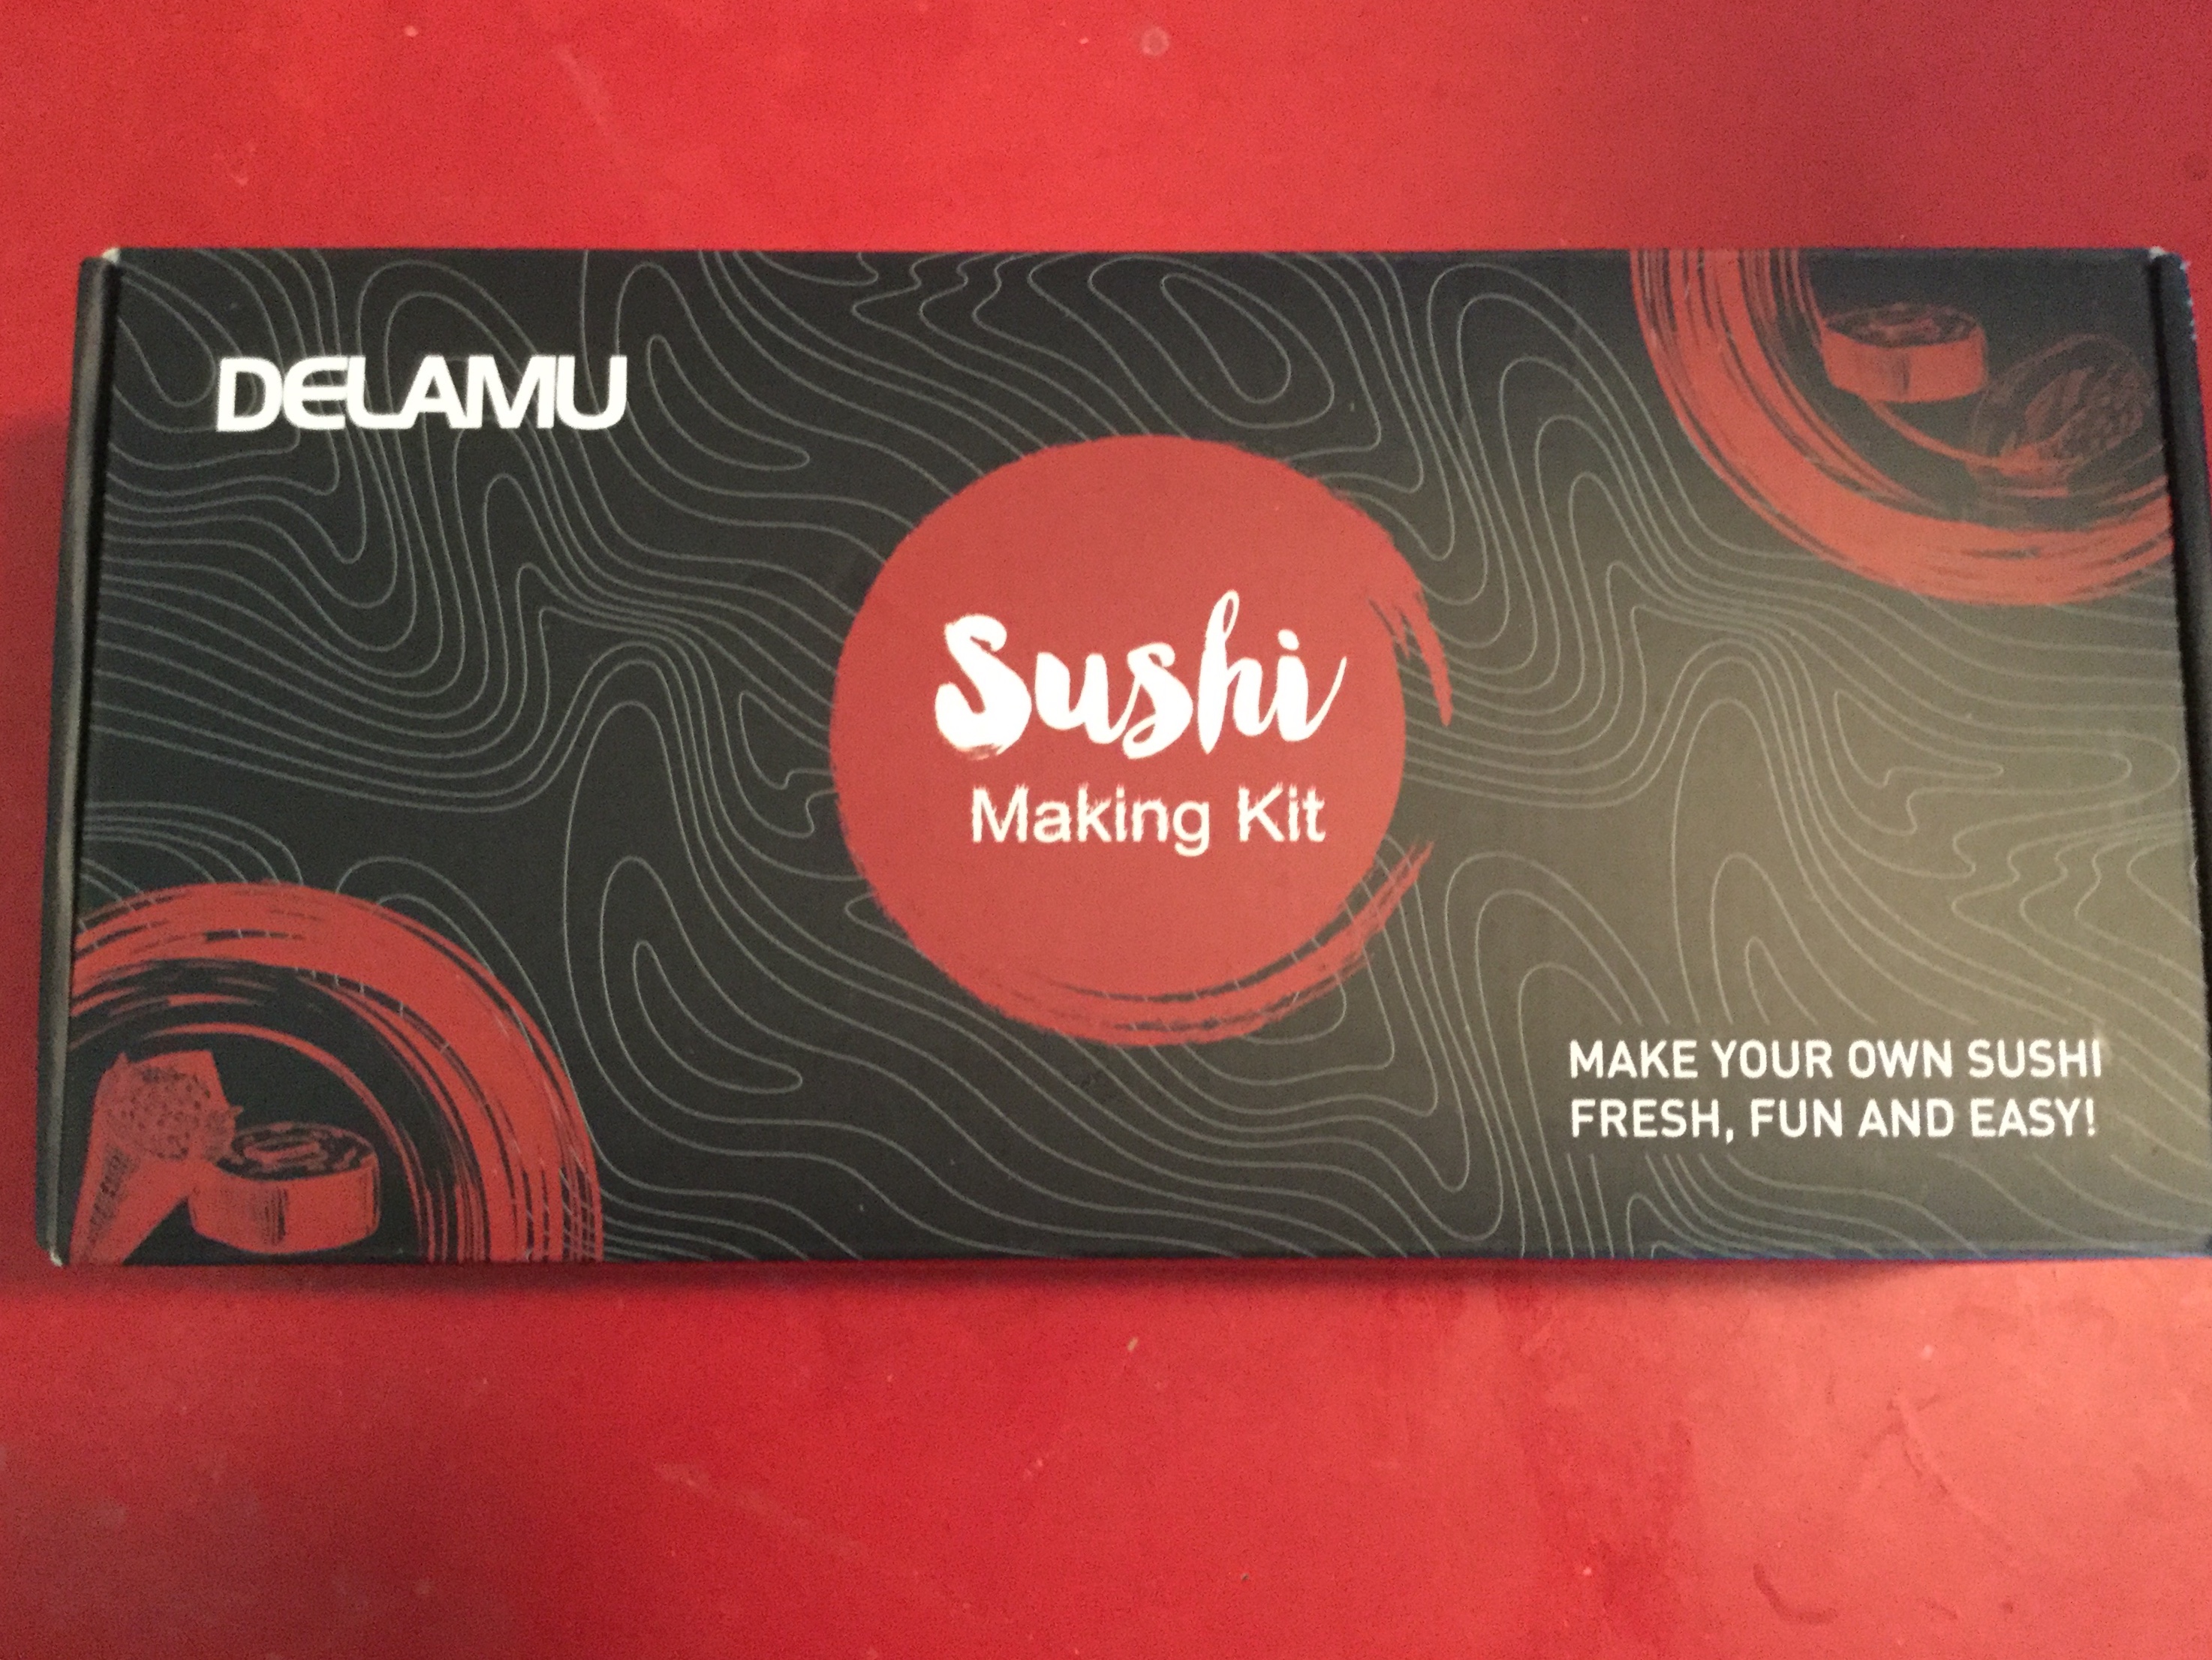 Sushi at home has never been simpler! Come unbox our DIY sushi kit wit